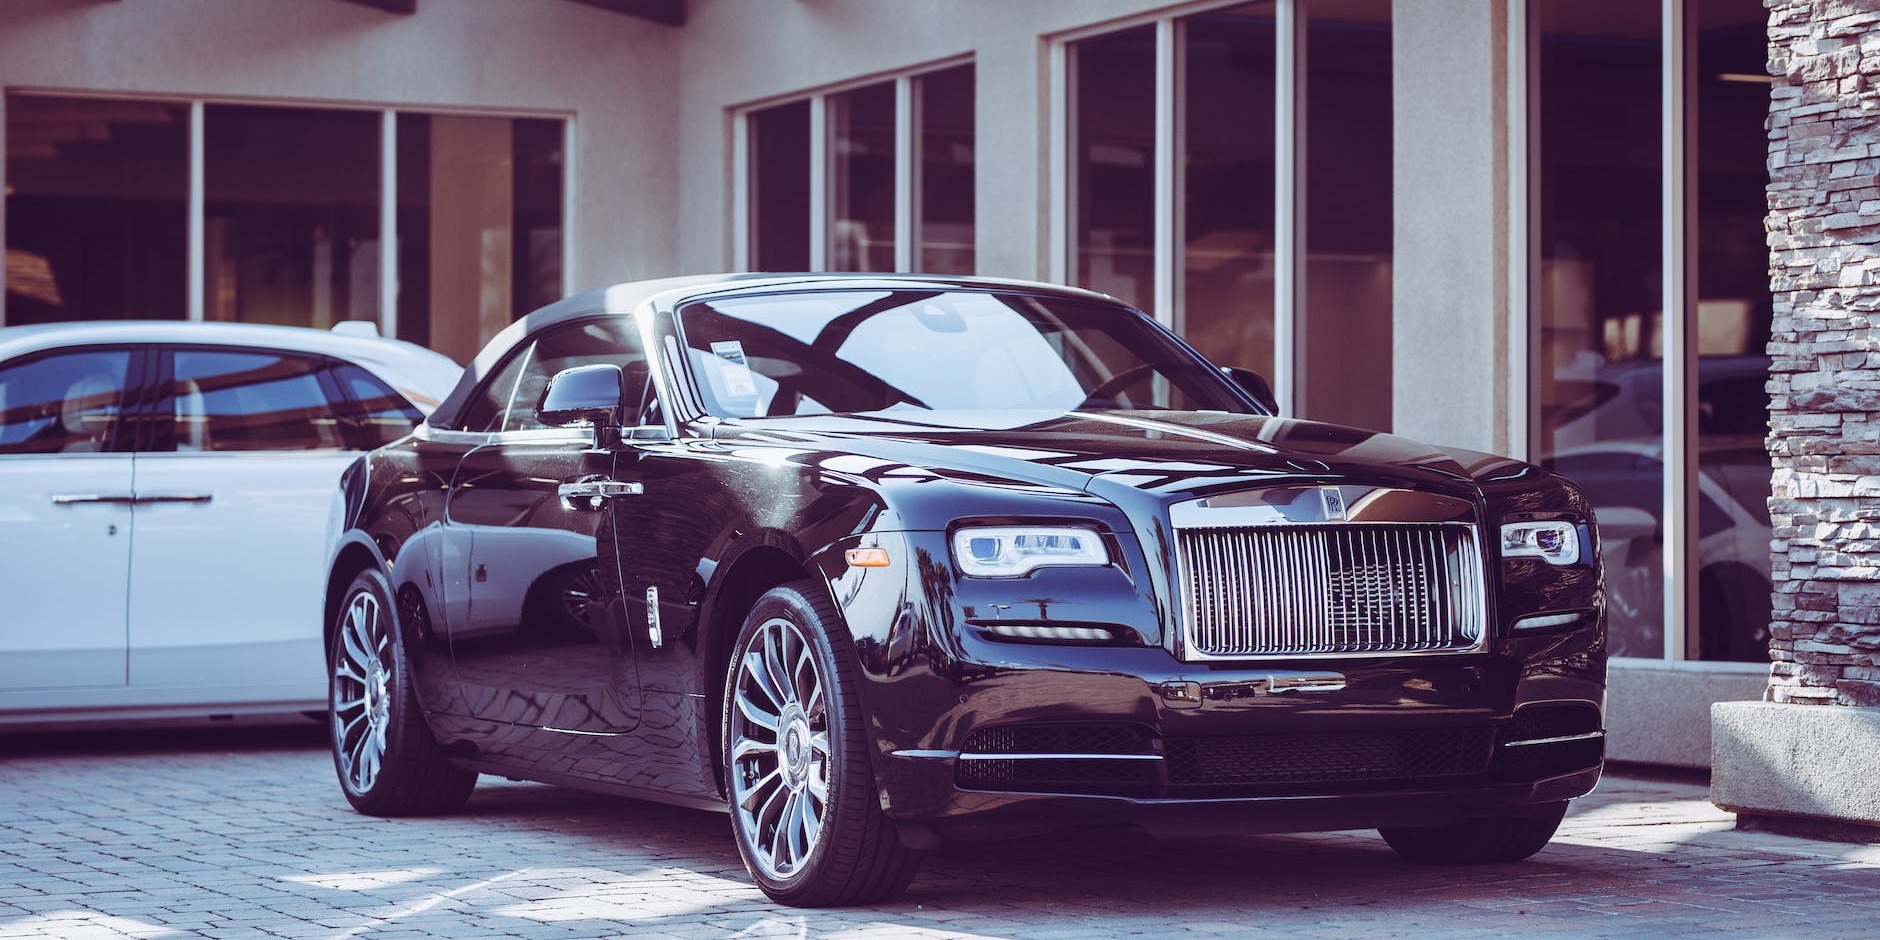 What Sets the Rolls Royce Phantom Apart from Other Luxury Vehicles?